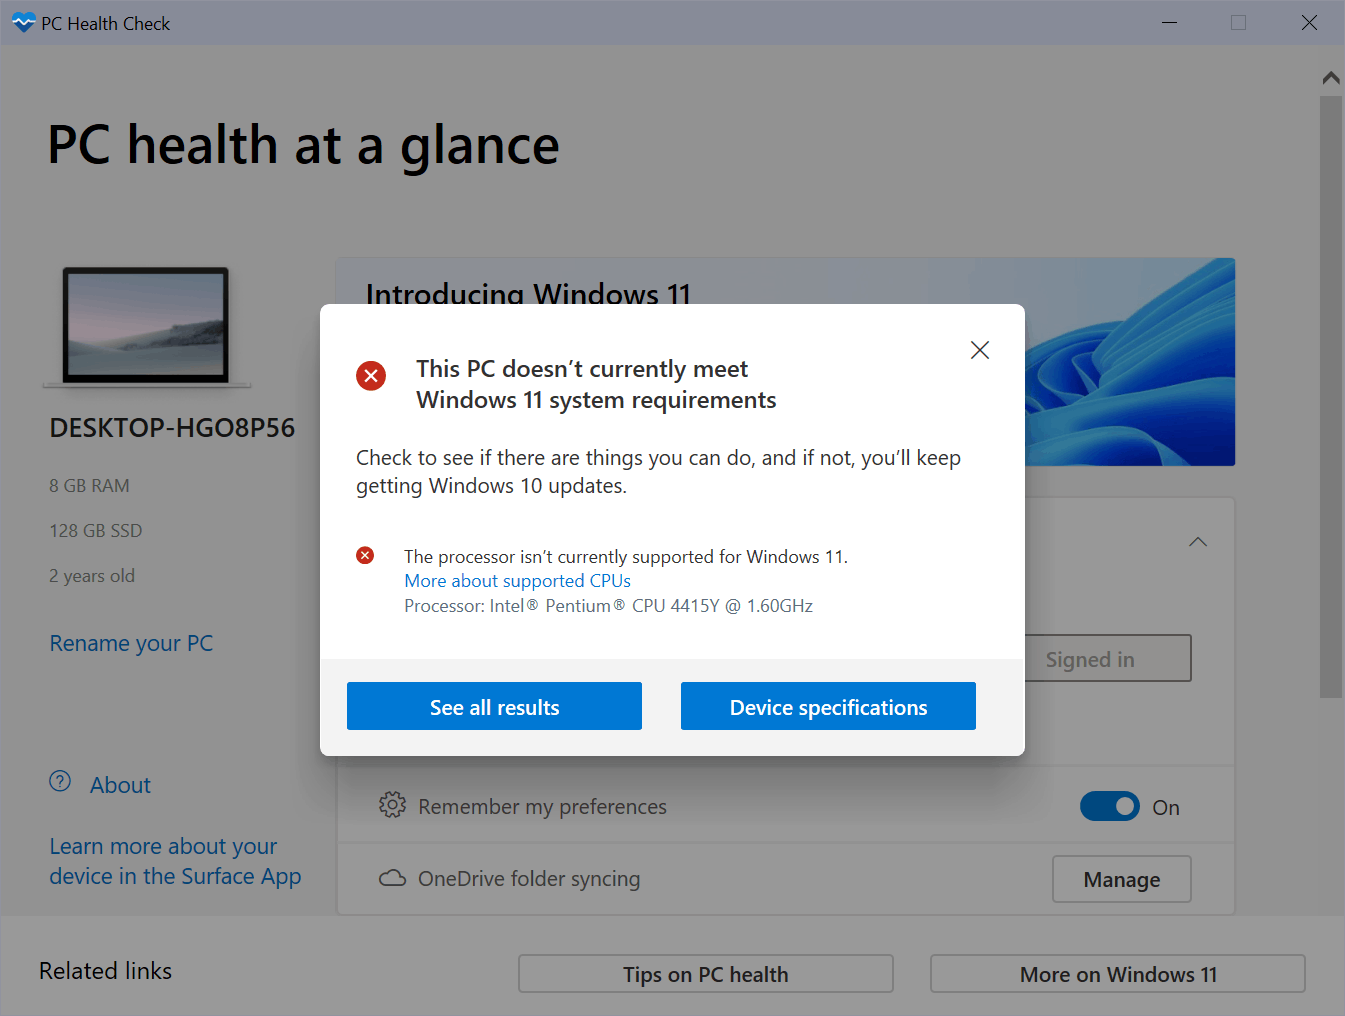 pc health check windows 11 requirements